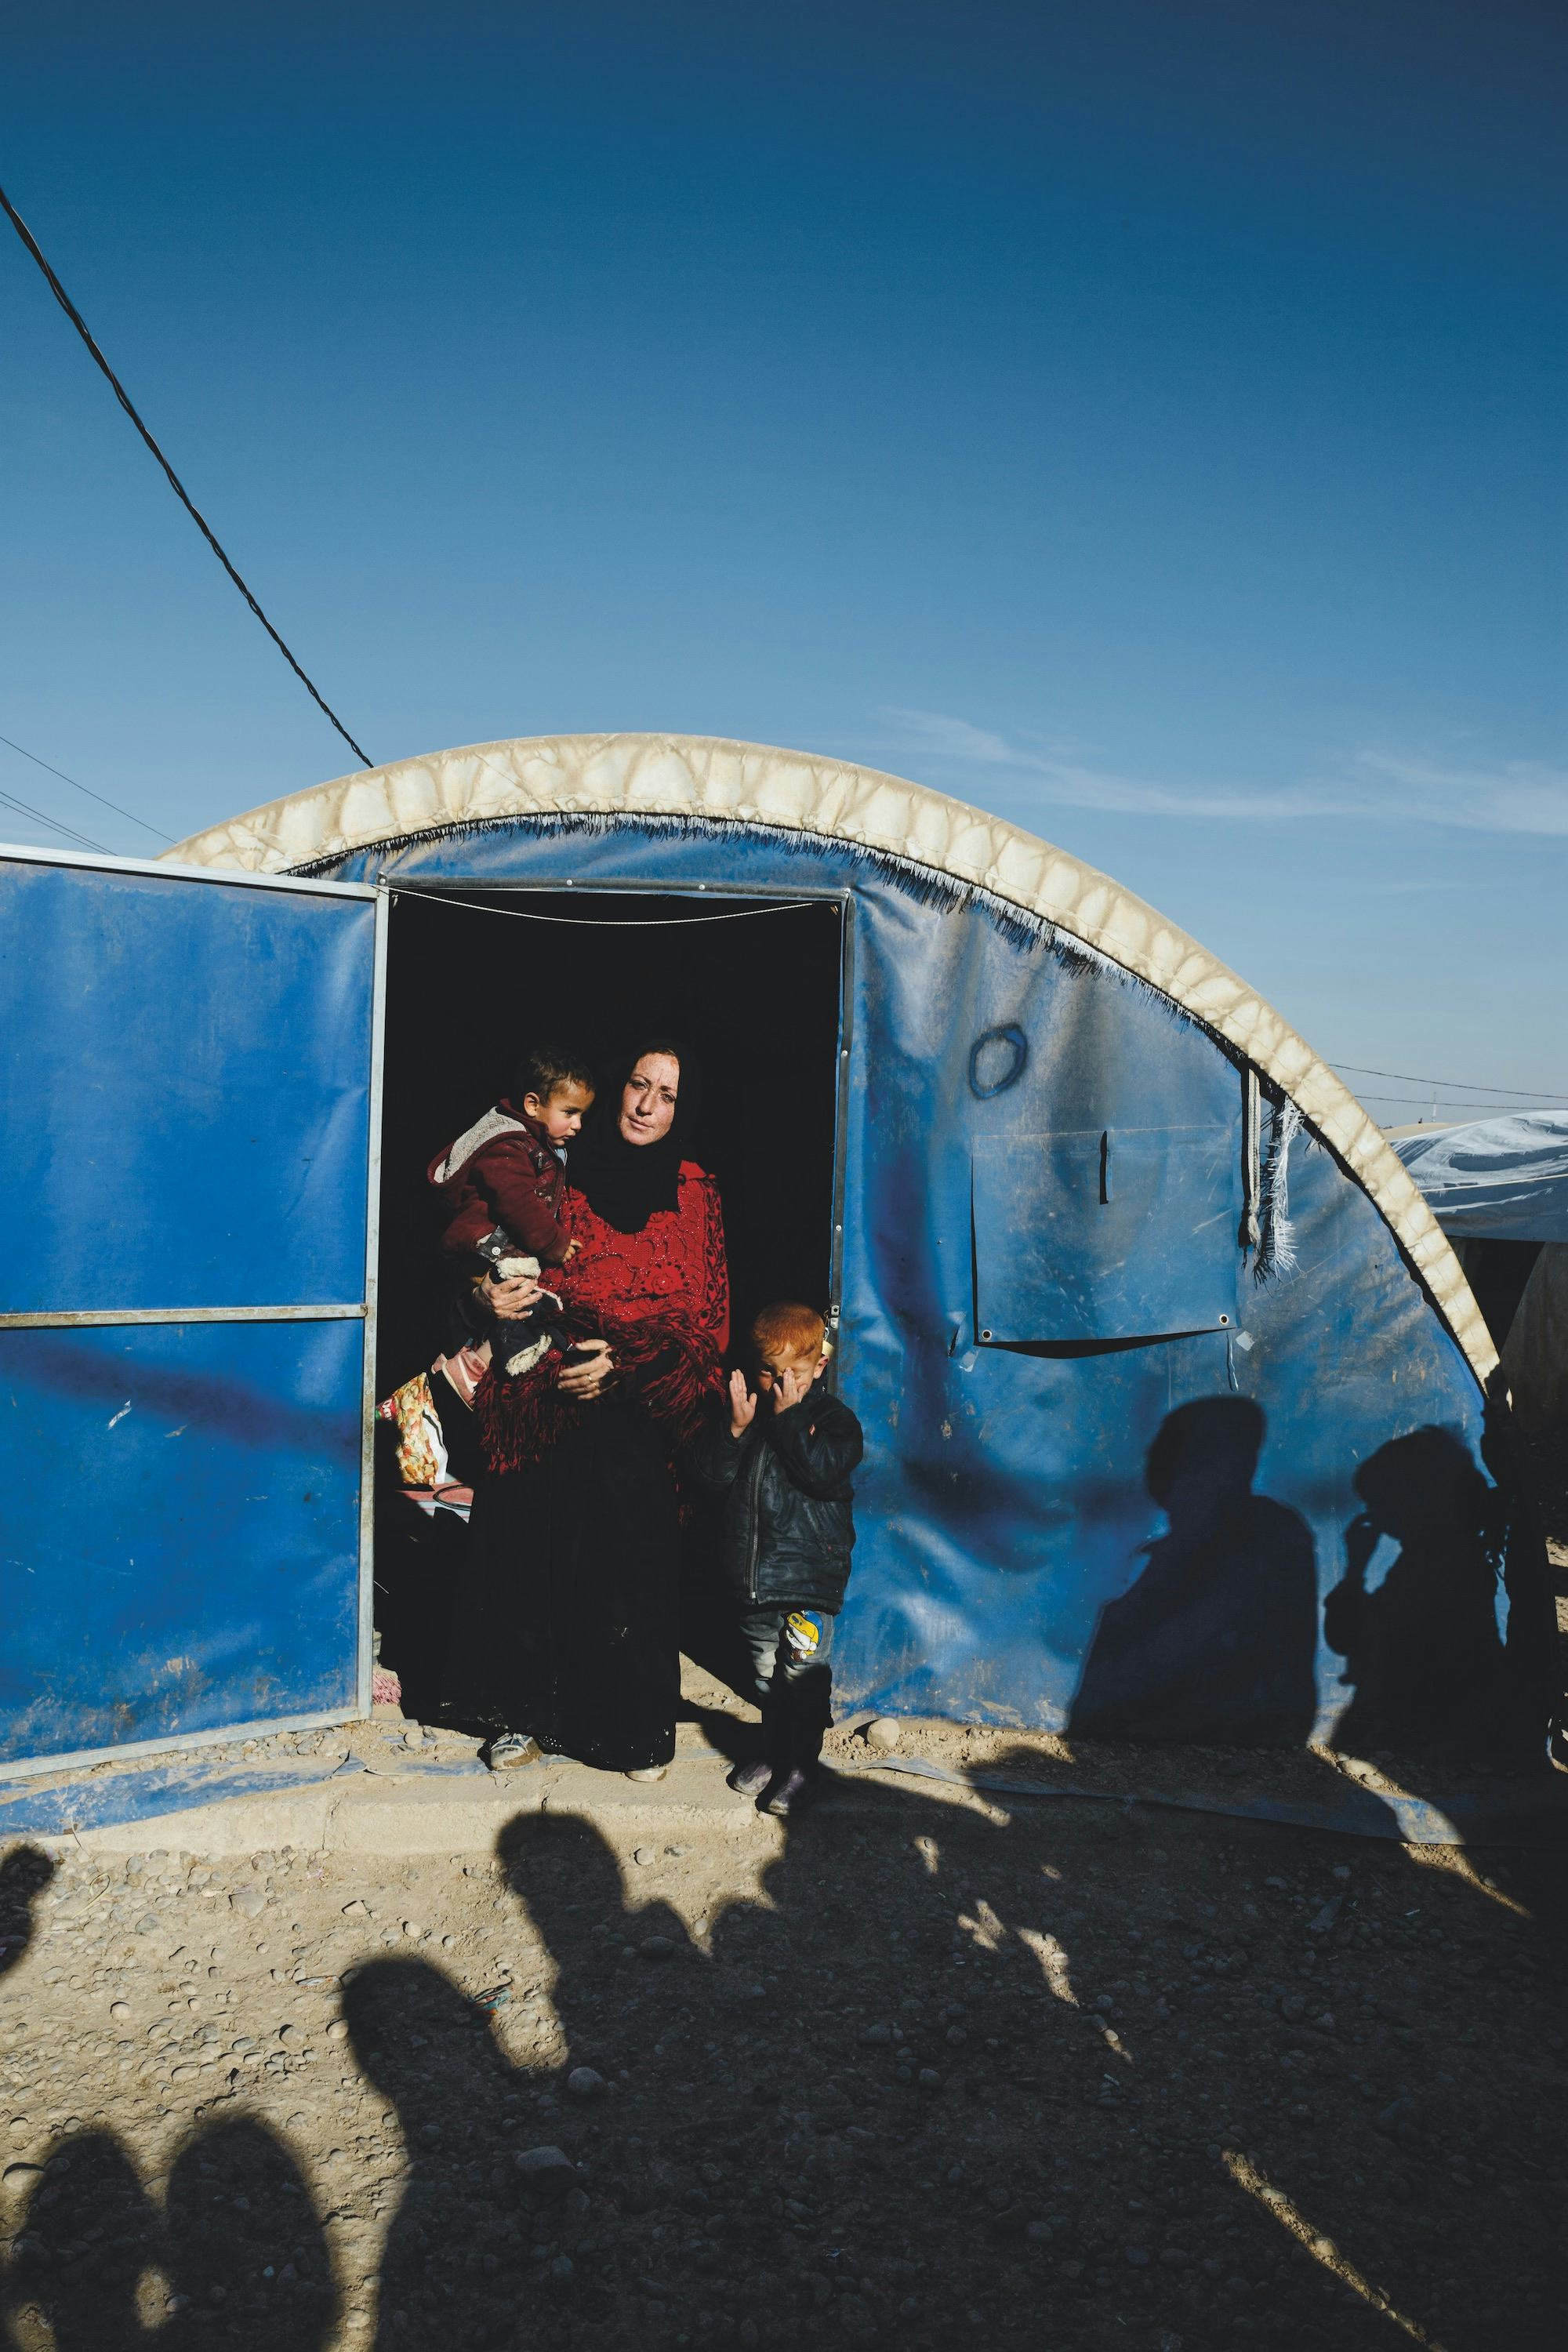 A woman carrying a child and one child at her feet, in the door opening of a refugee / shelter tent.